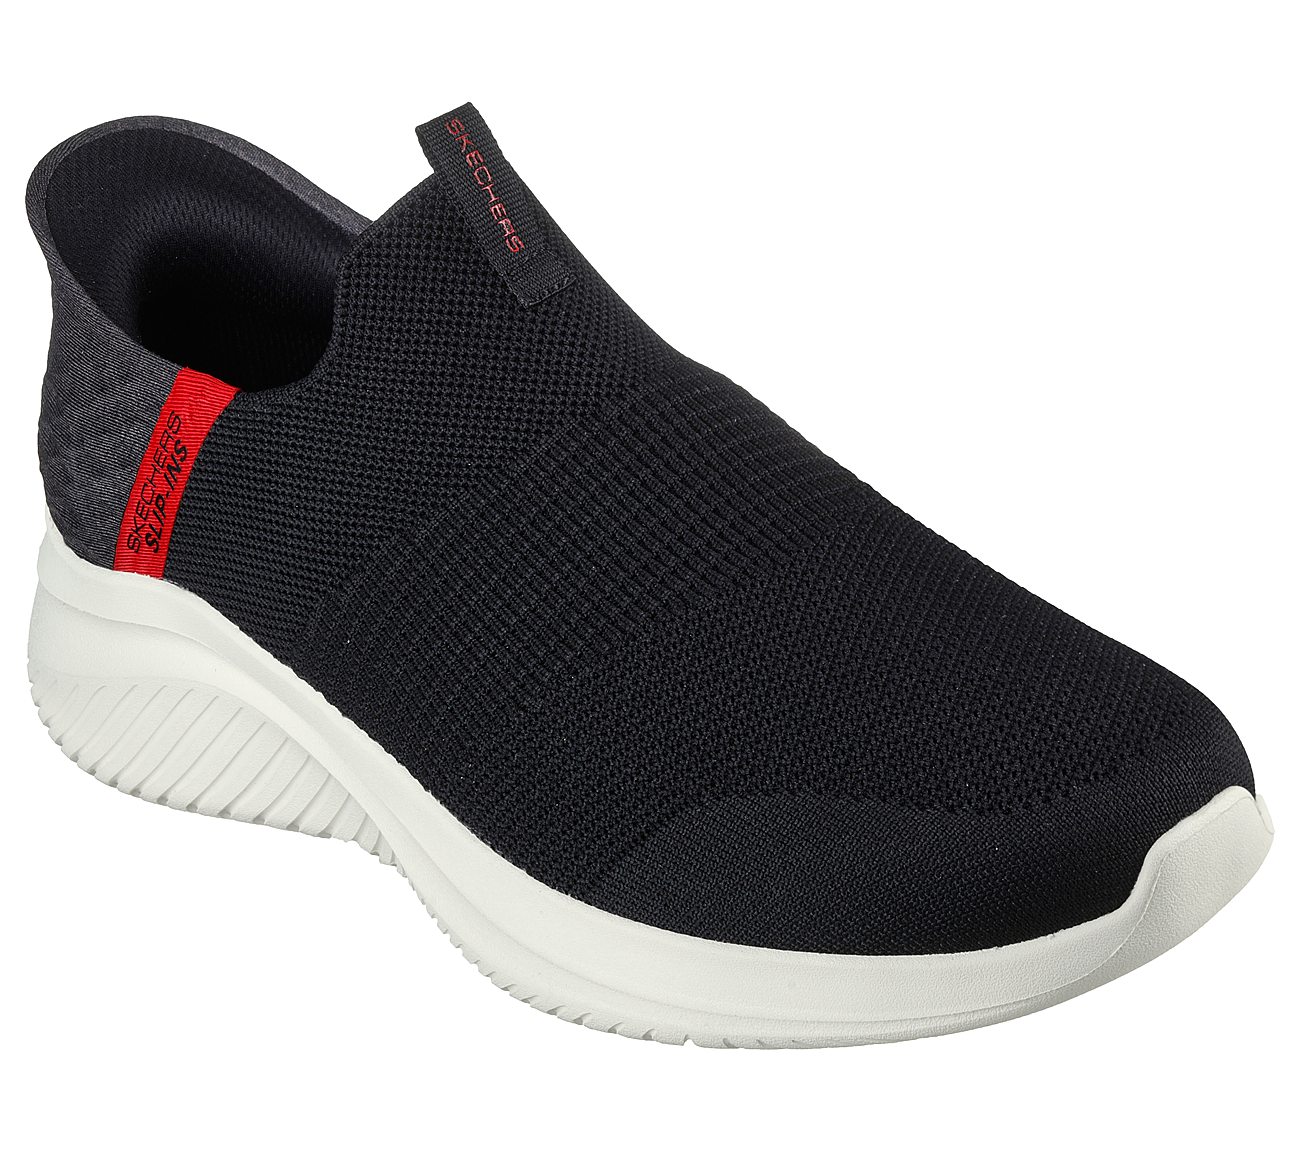 ULTRA FLEX 3.0 - VIEWPOINT, BLACK/RED Footwear Right View